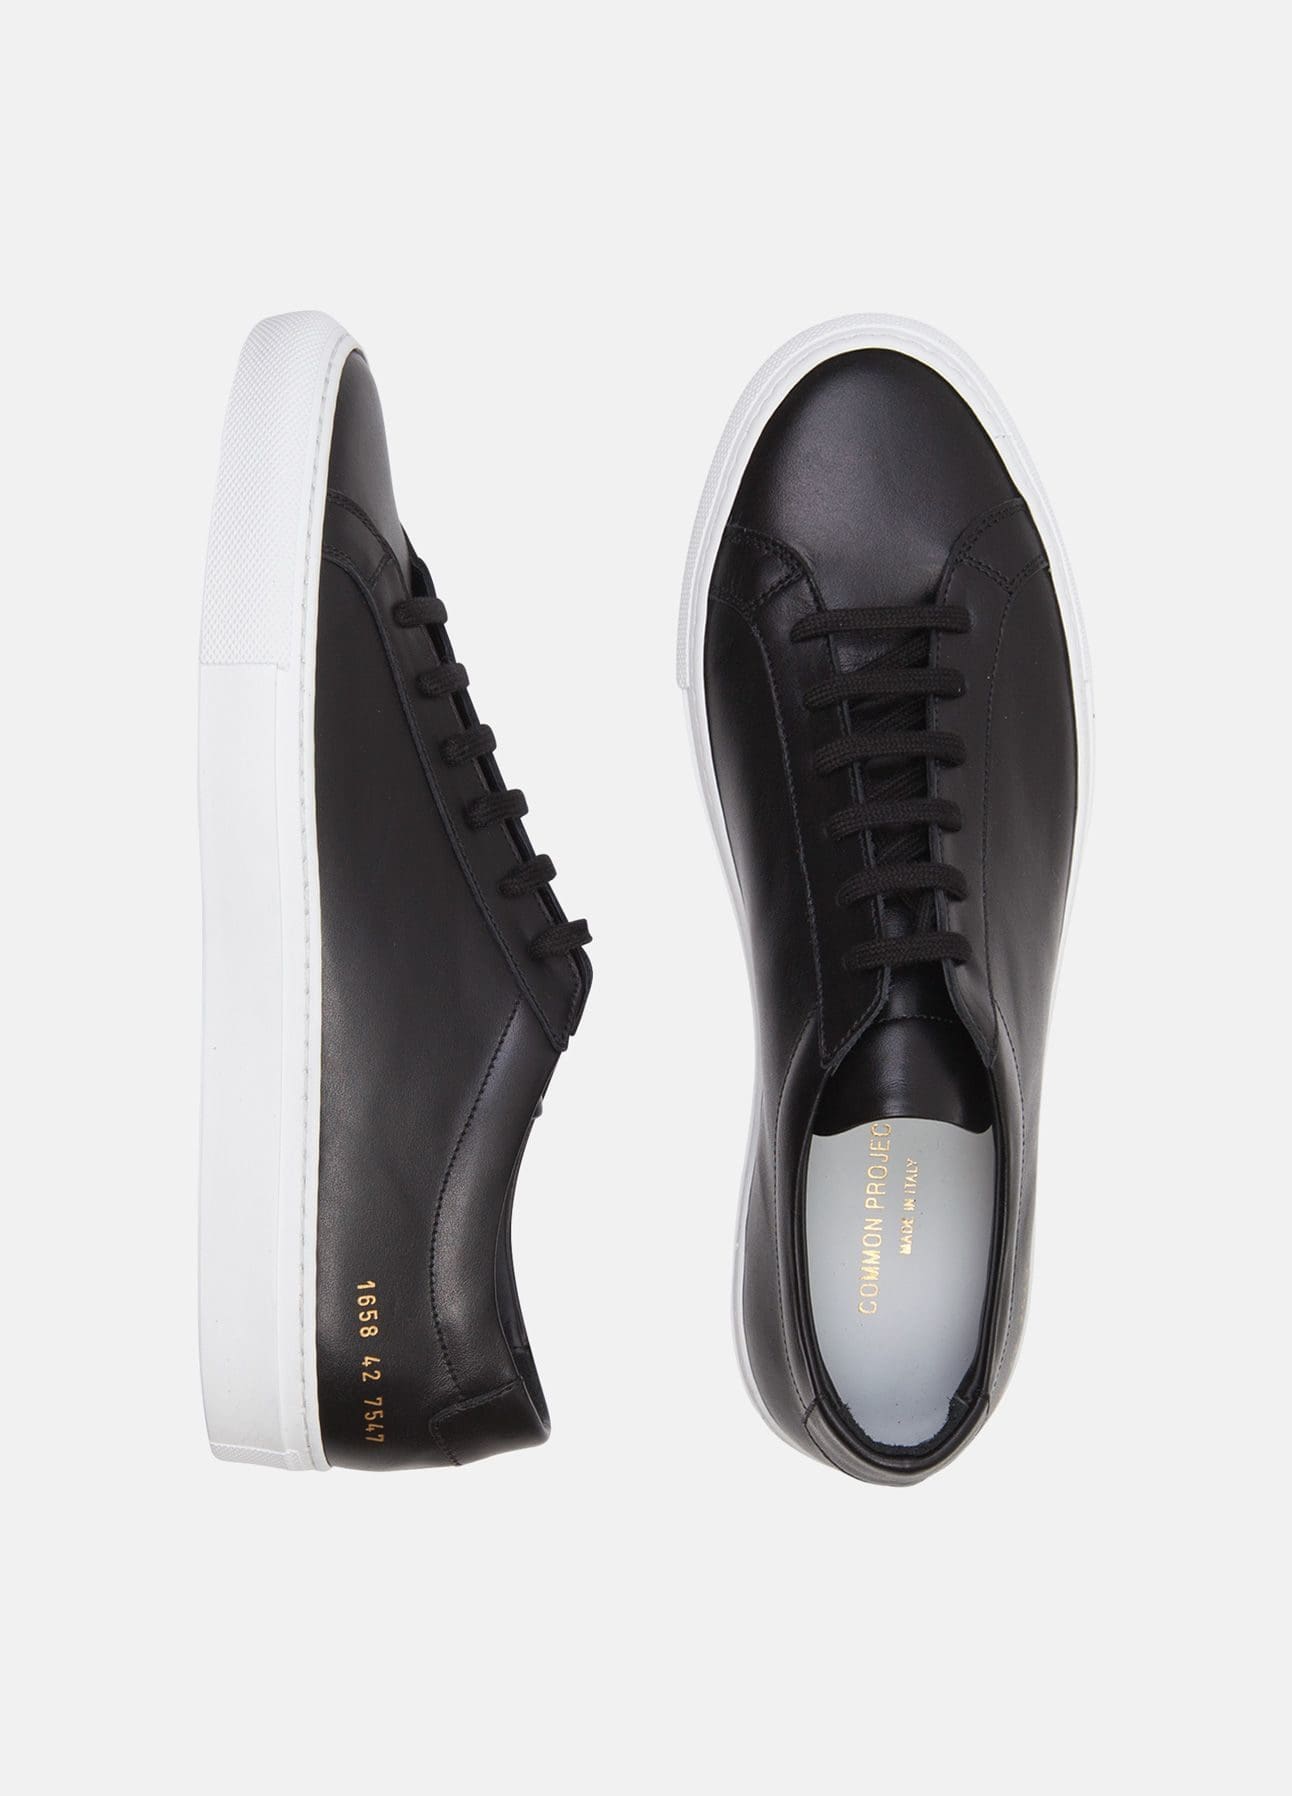 Sorte sneakers fra Common Projects